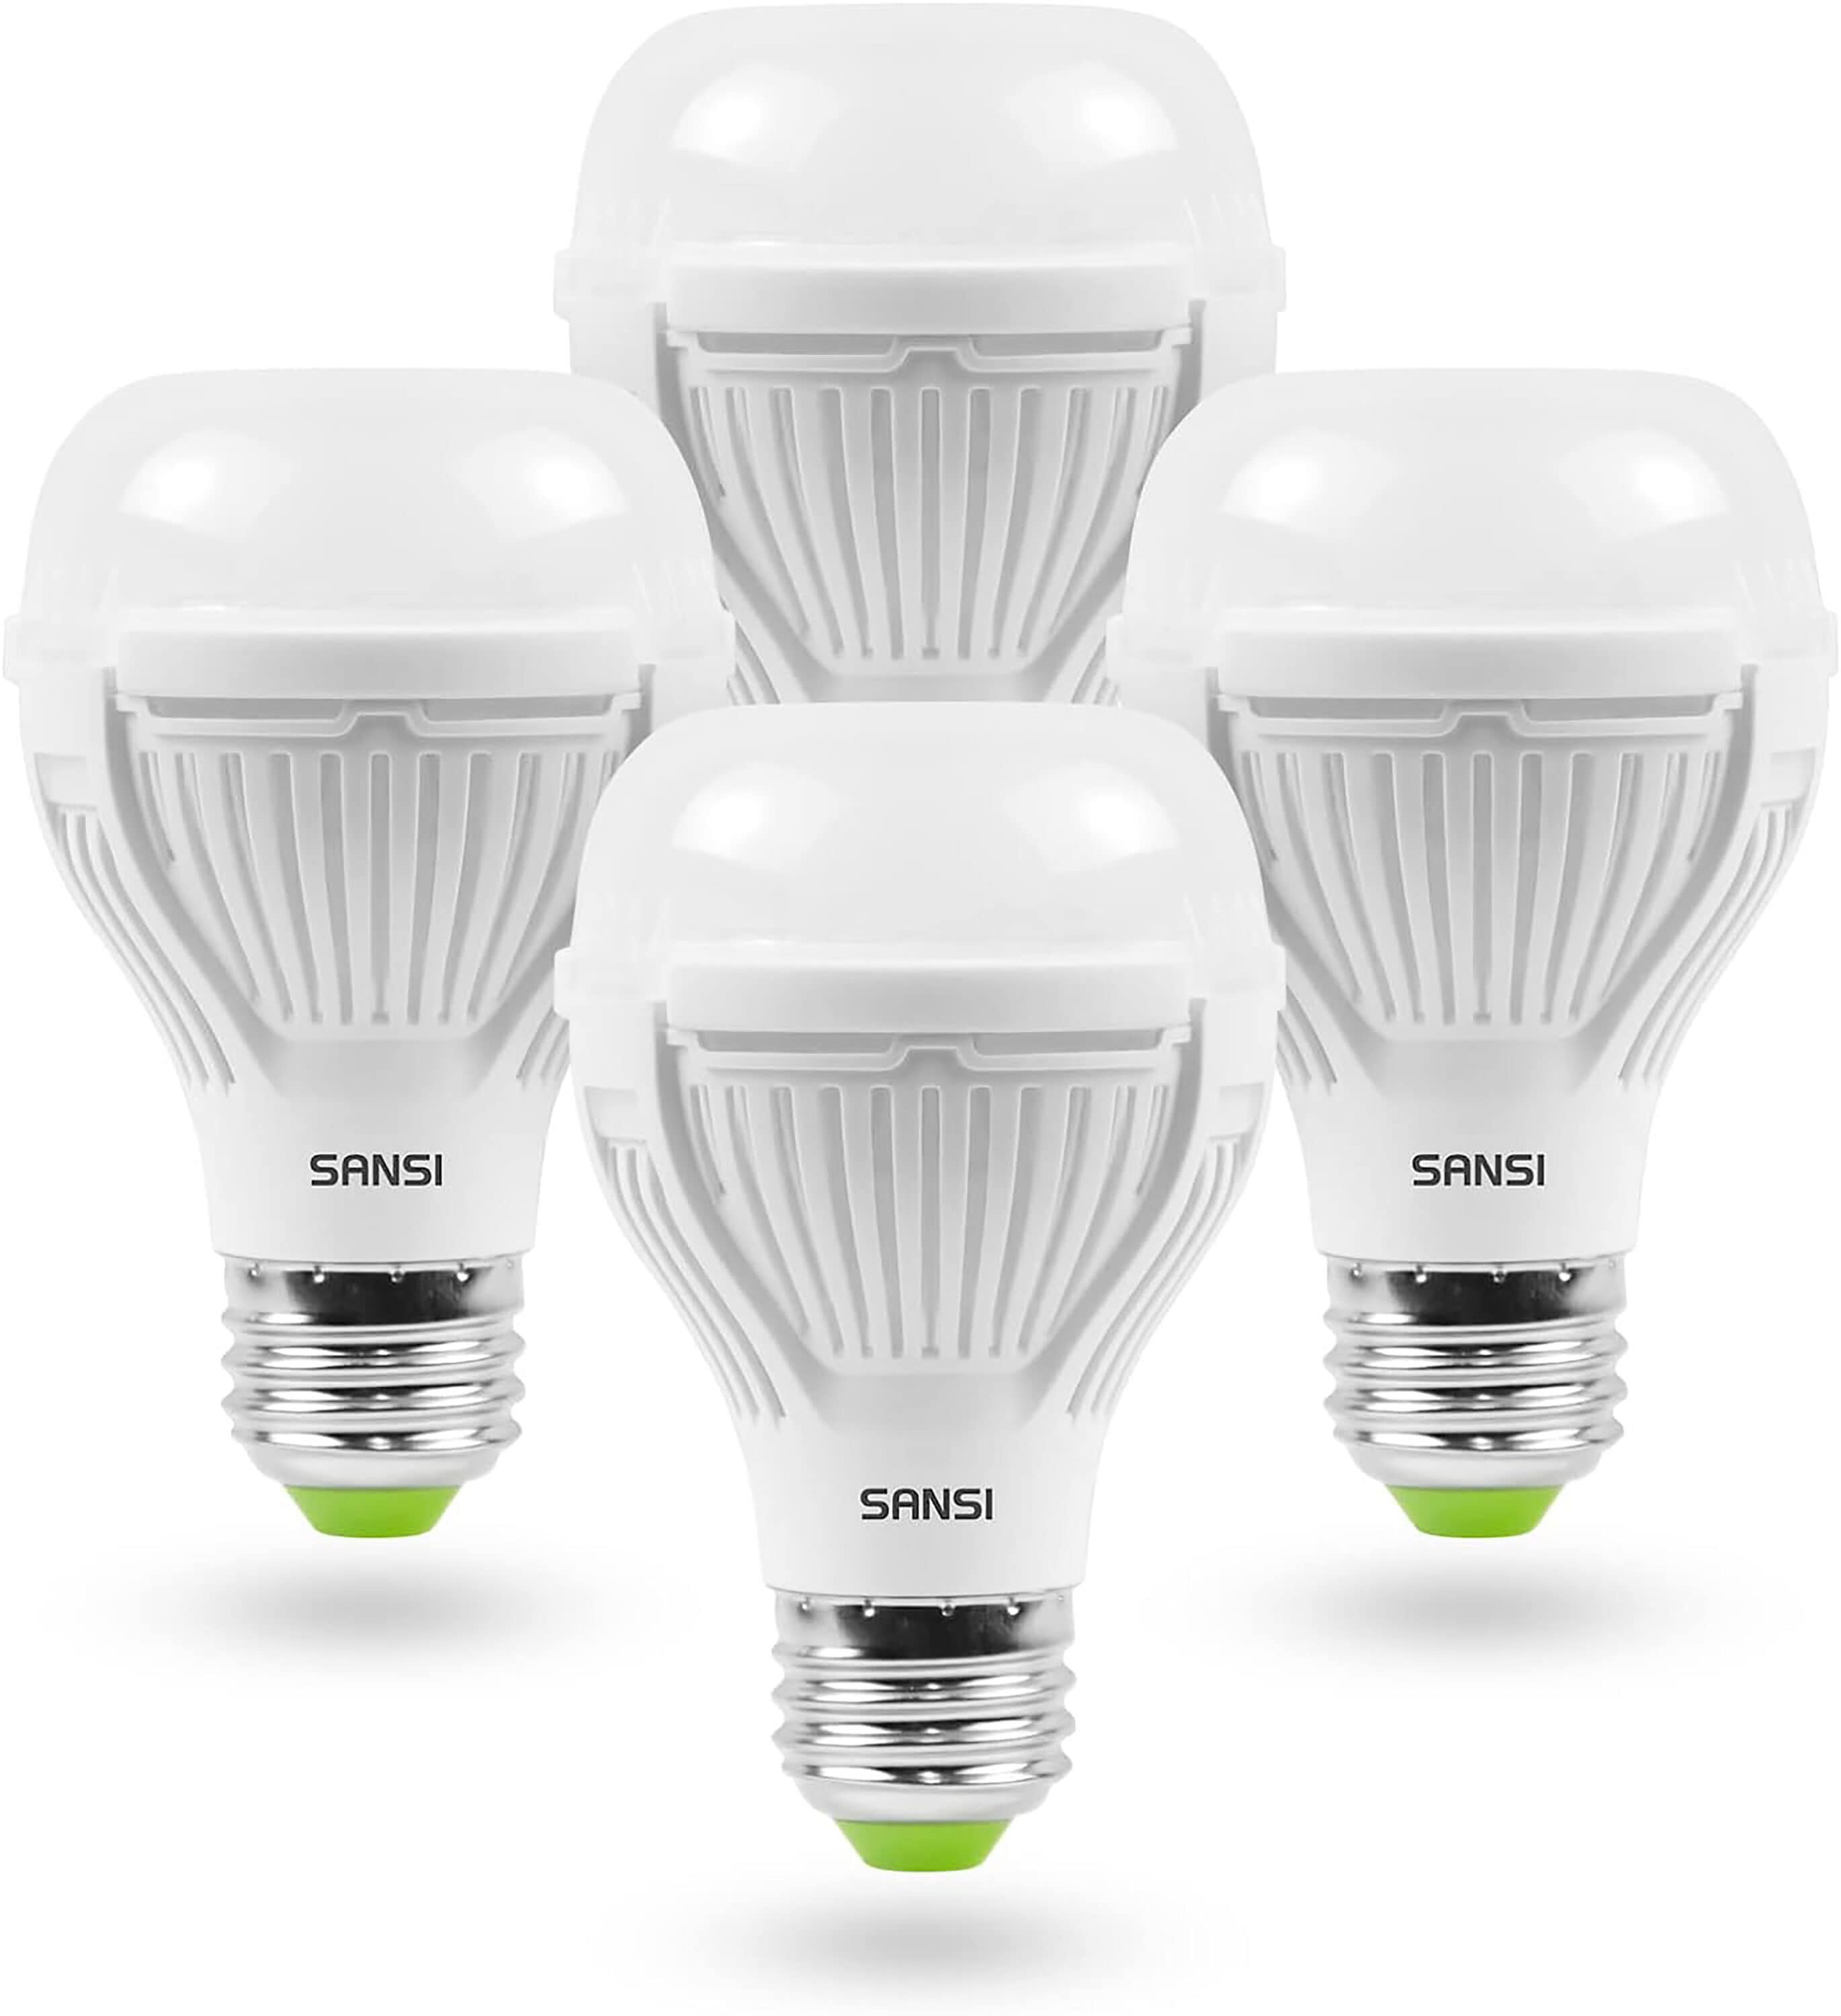 SANSI SANSI Equivalent A19 LED Light Bulb, 4 Pack 1600 Lumens Light 5000K Non-Dimmable, Efficient, Safe, Energy Saving for Home Lighting in the General Purpose LED Light Bulbs department at Lowes.com